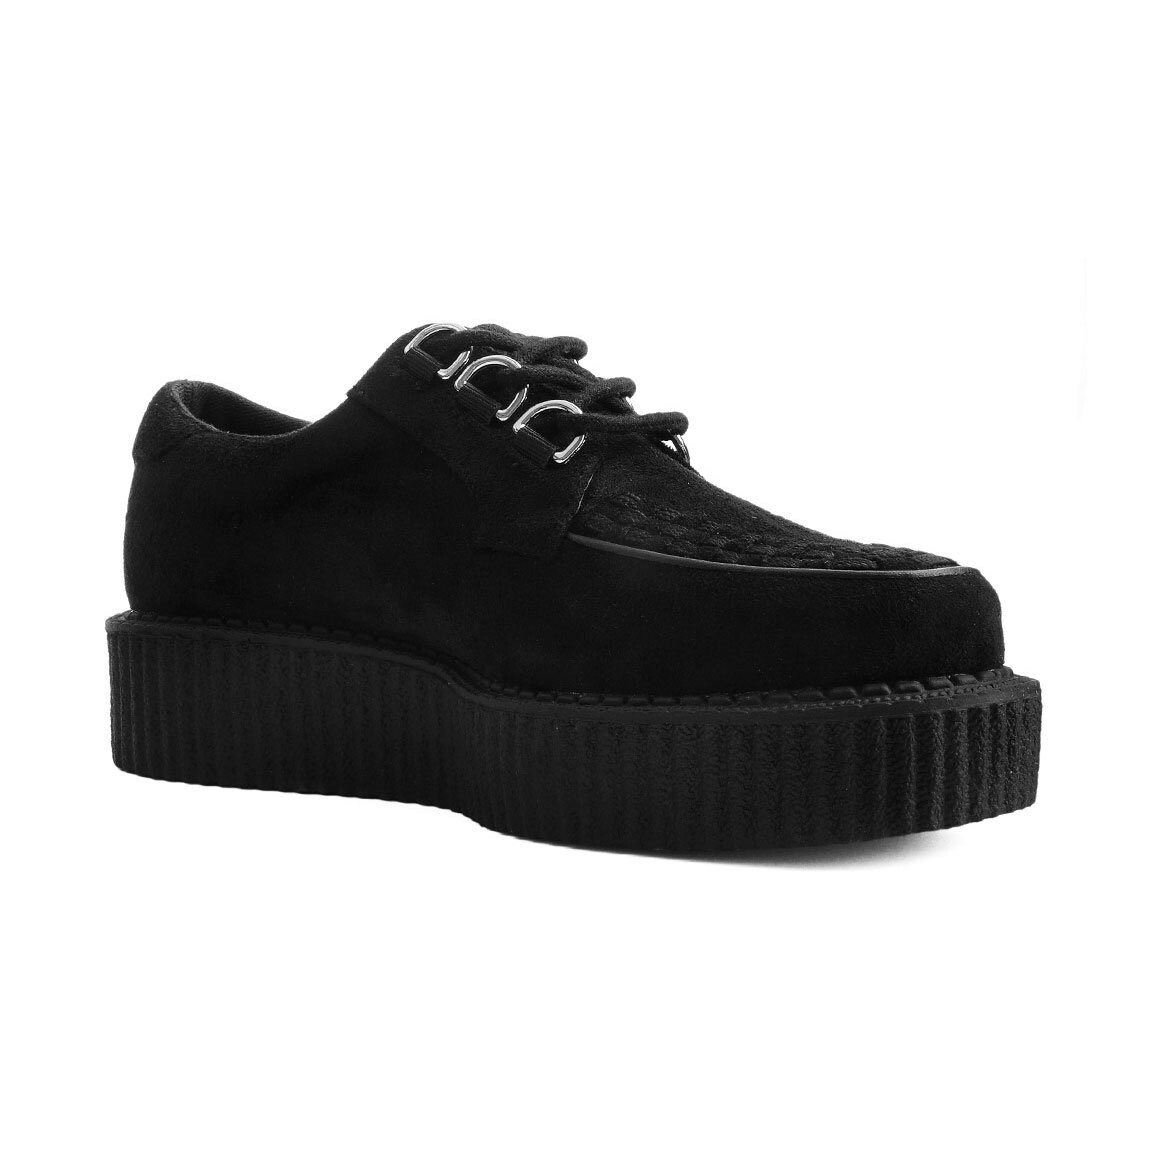 anarchic creepers